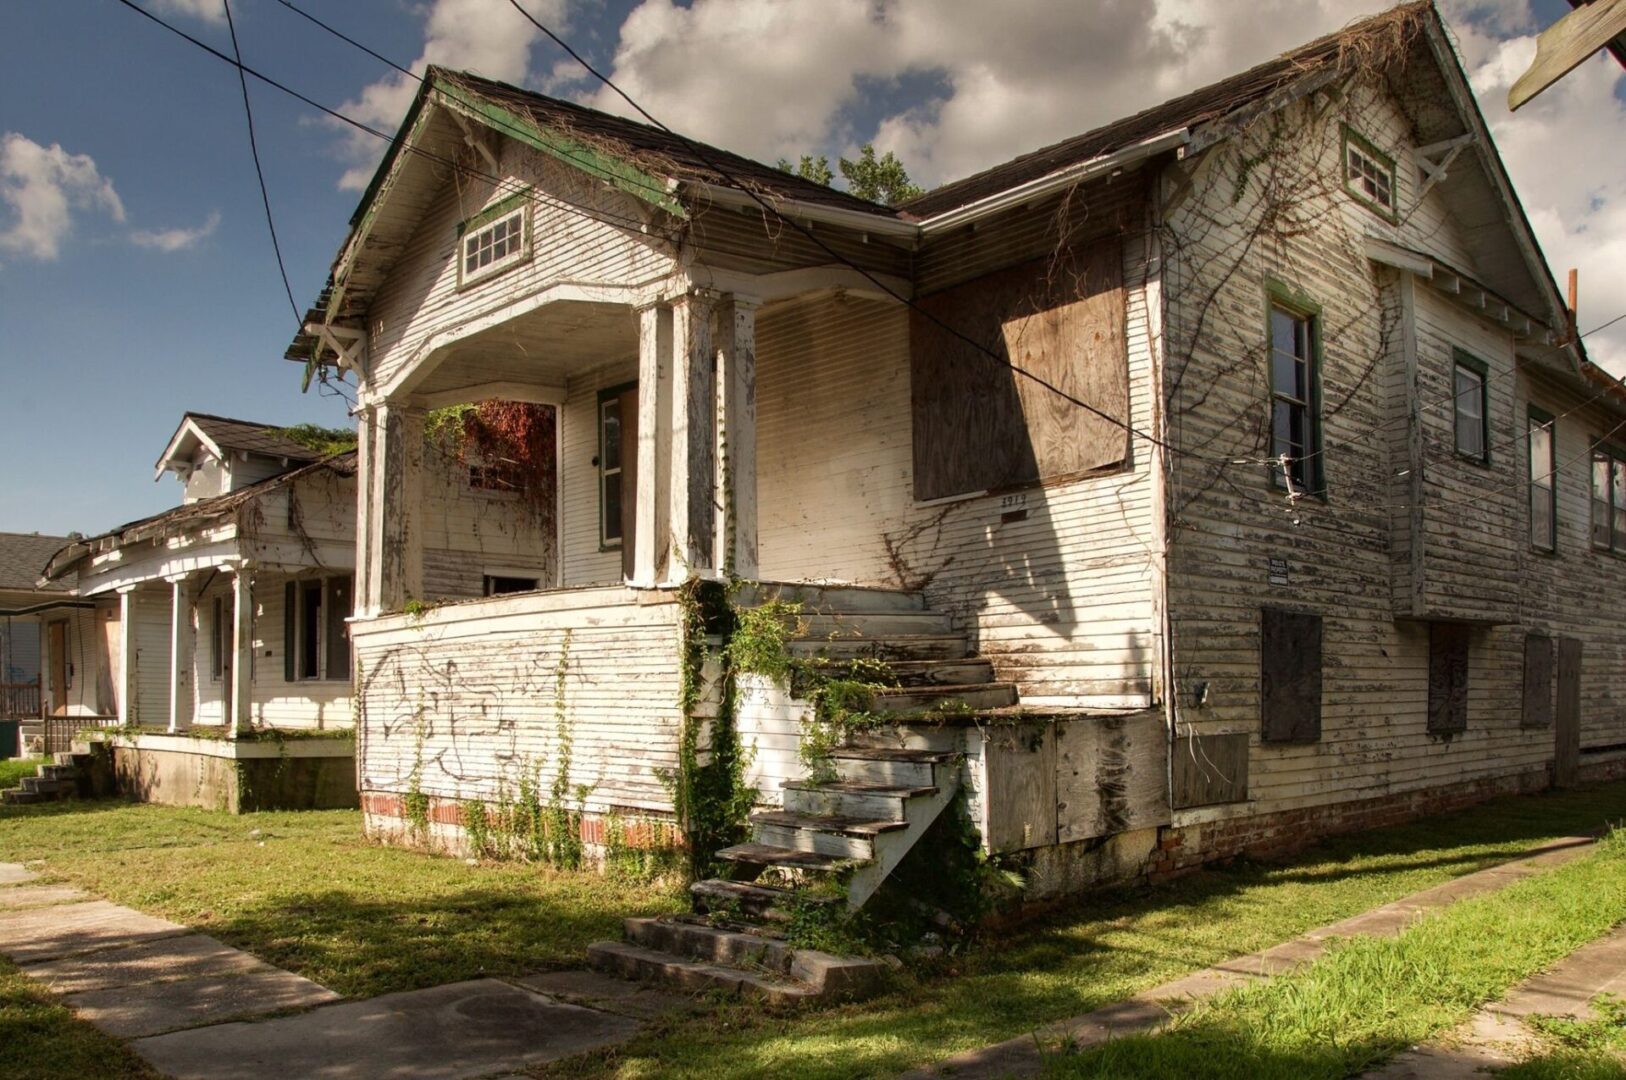 An old abandoned house, one of many potential abandoned homes for sale in the Austin TX neighborhood.